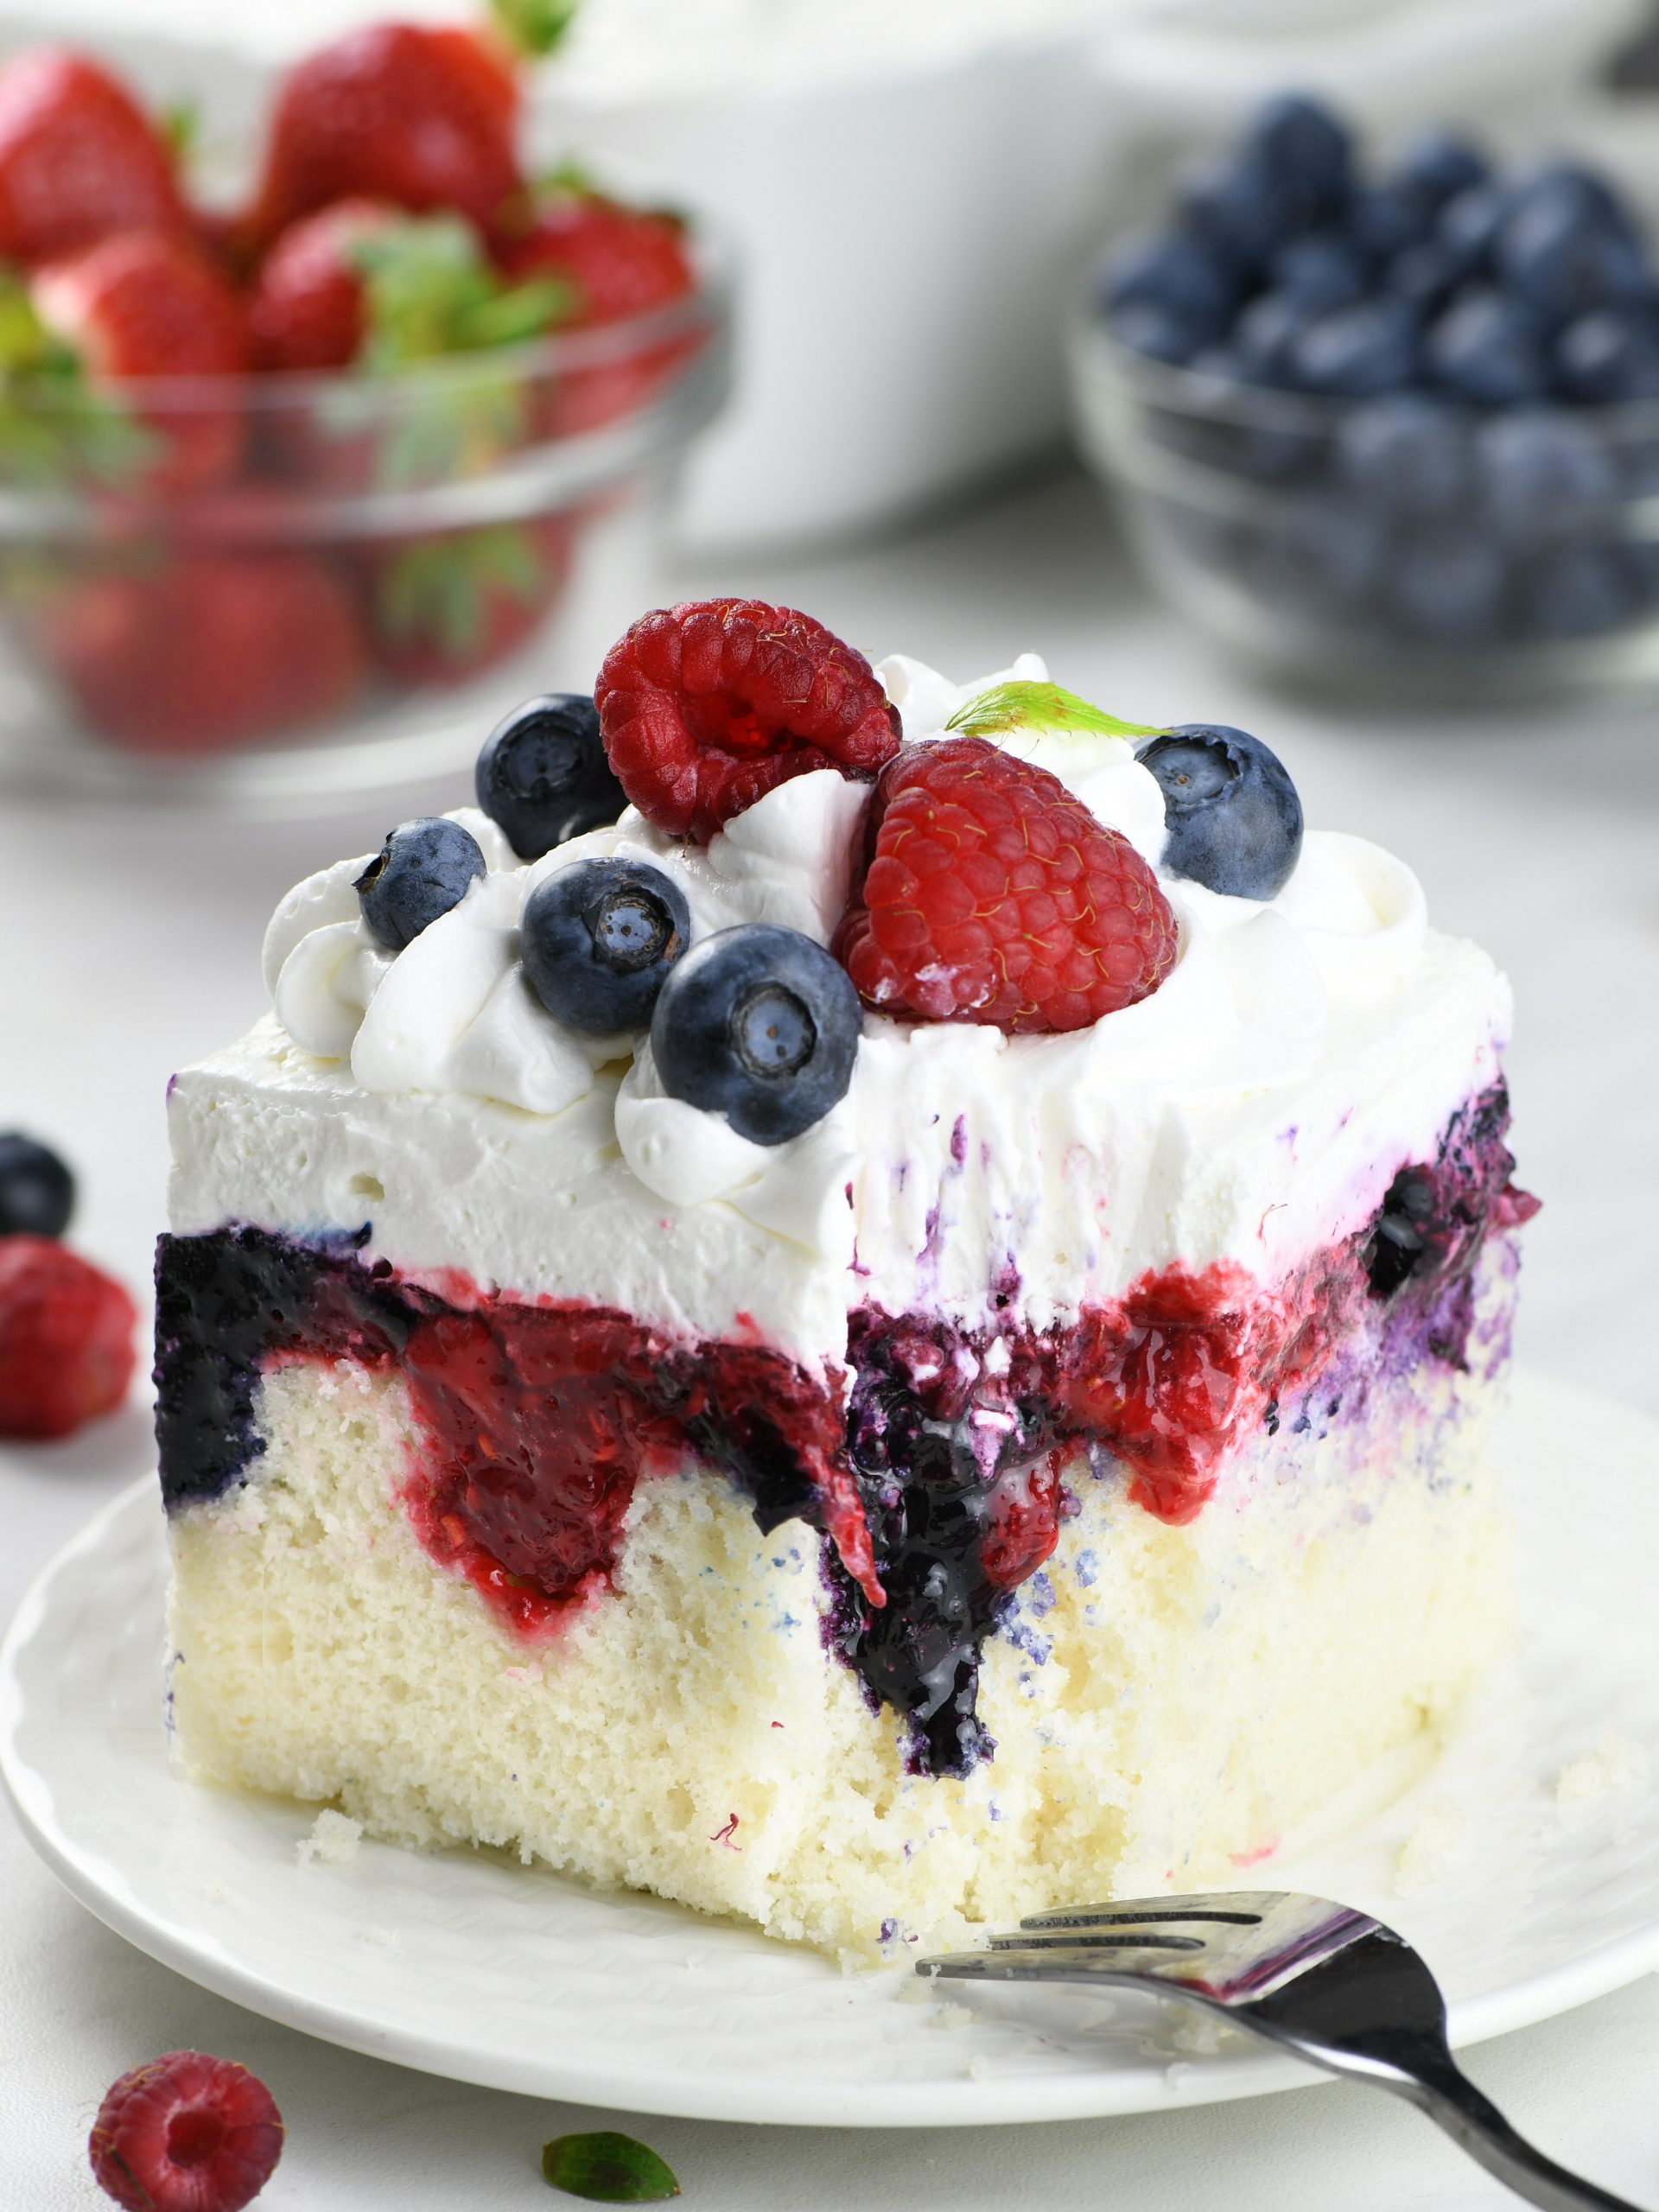 Bursting with the fresh and vibrant flavors of summer, this Summer Berry Poke Cake effortlessly combines the sweet tartness of blueberries, strawberries, and raspberries, crowned with a light, airy whipped cream.